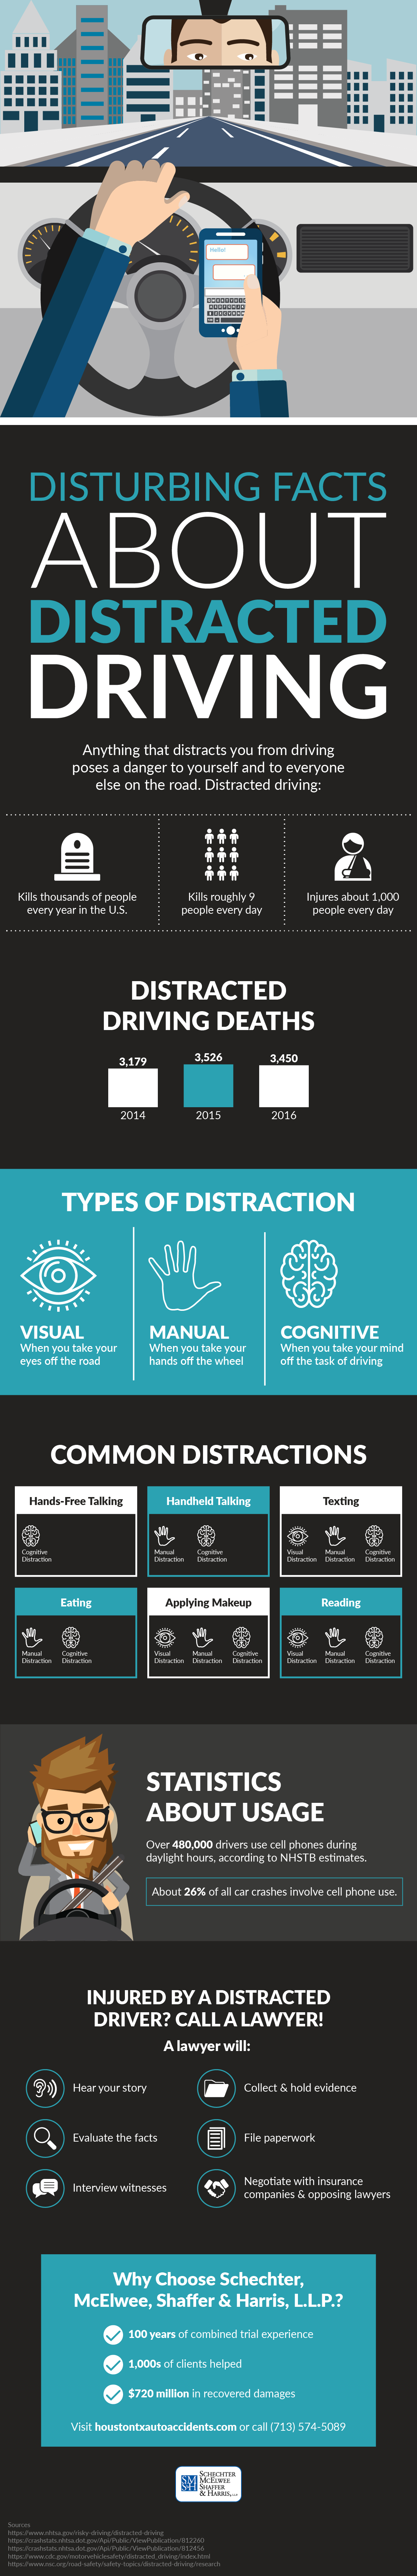 Distracted Driving Disturbing Facts Infographic